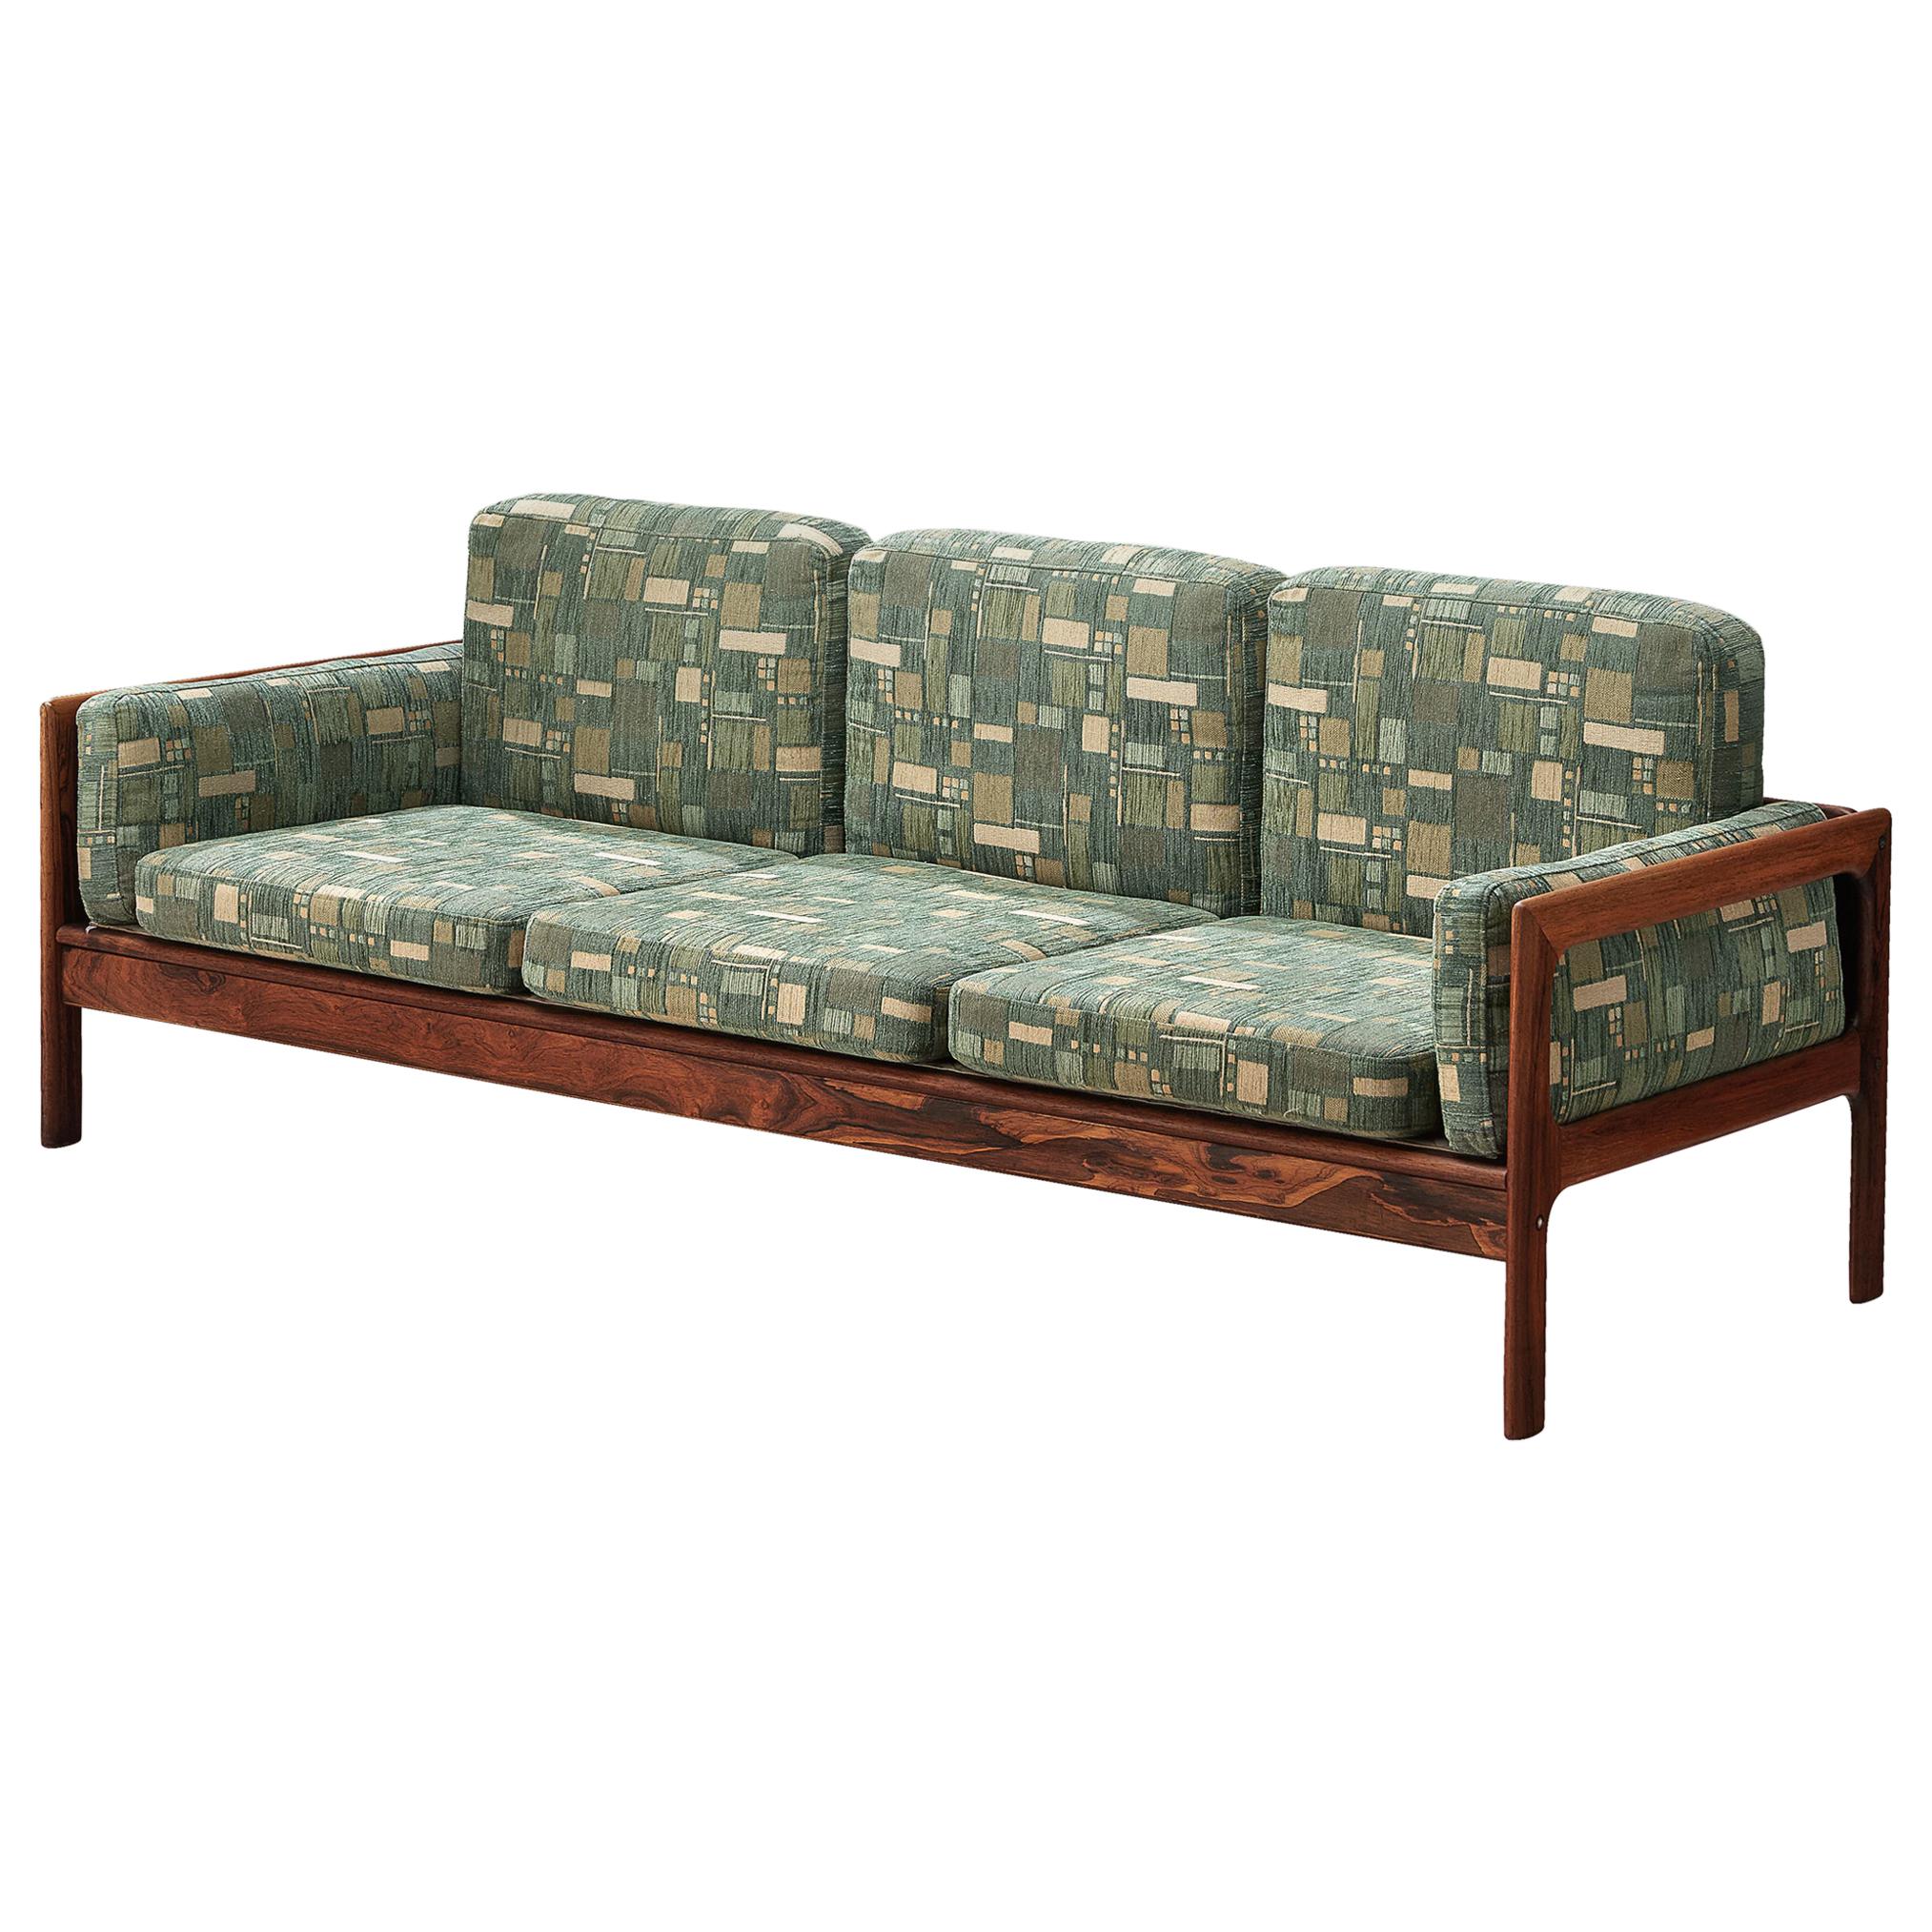 Danish Sofa in Green Patterned Upholstery